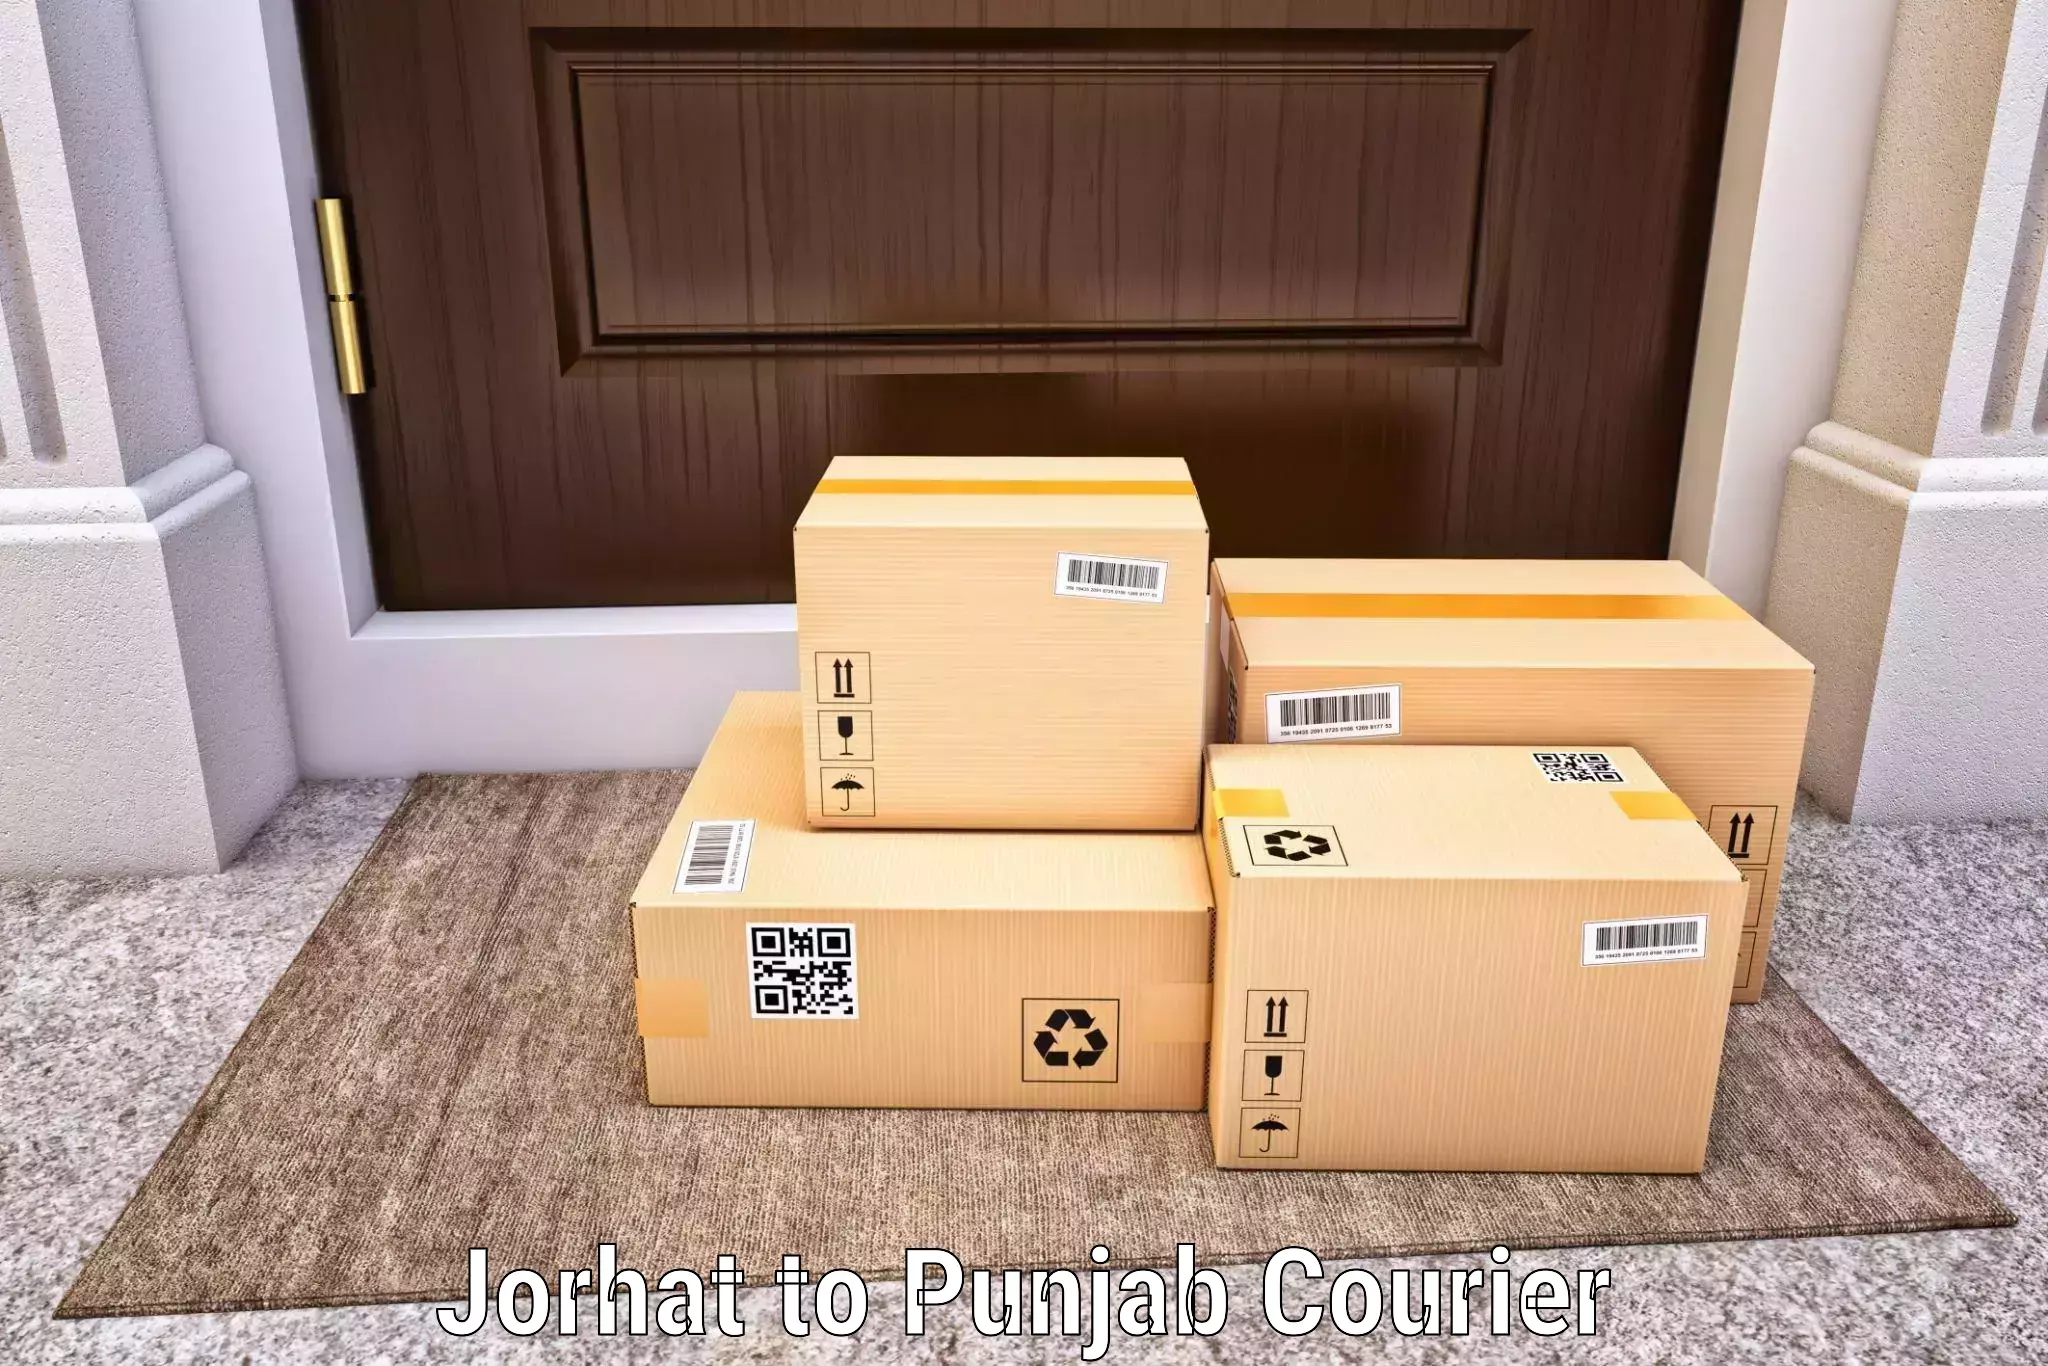 Courier service comparison Jorhat to Giddarbaha